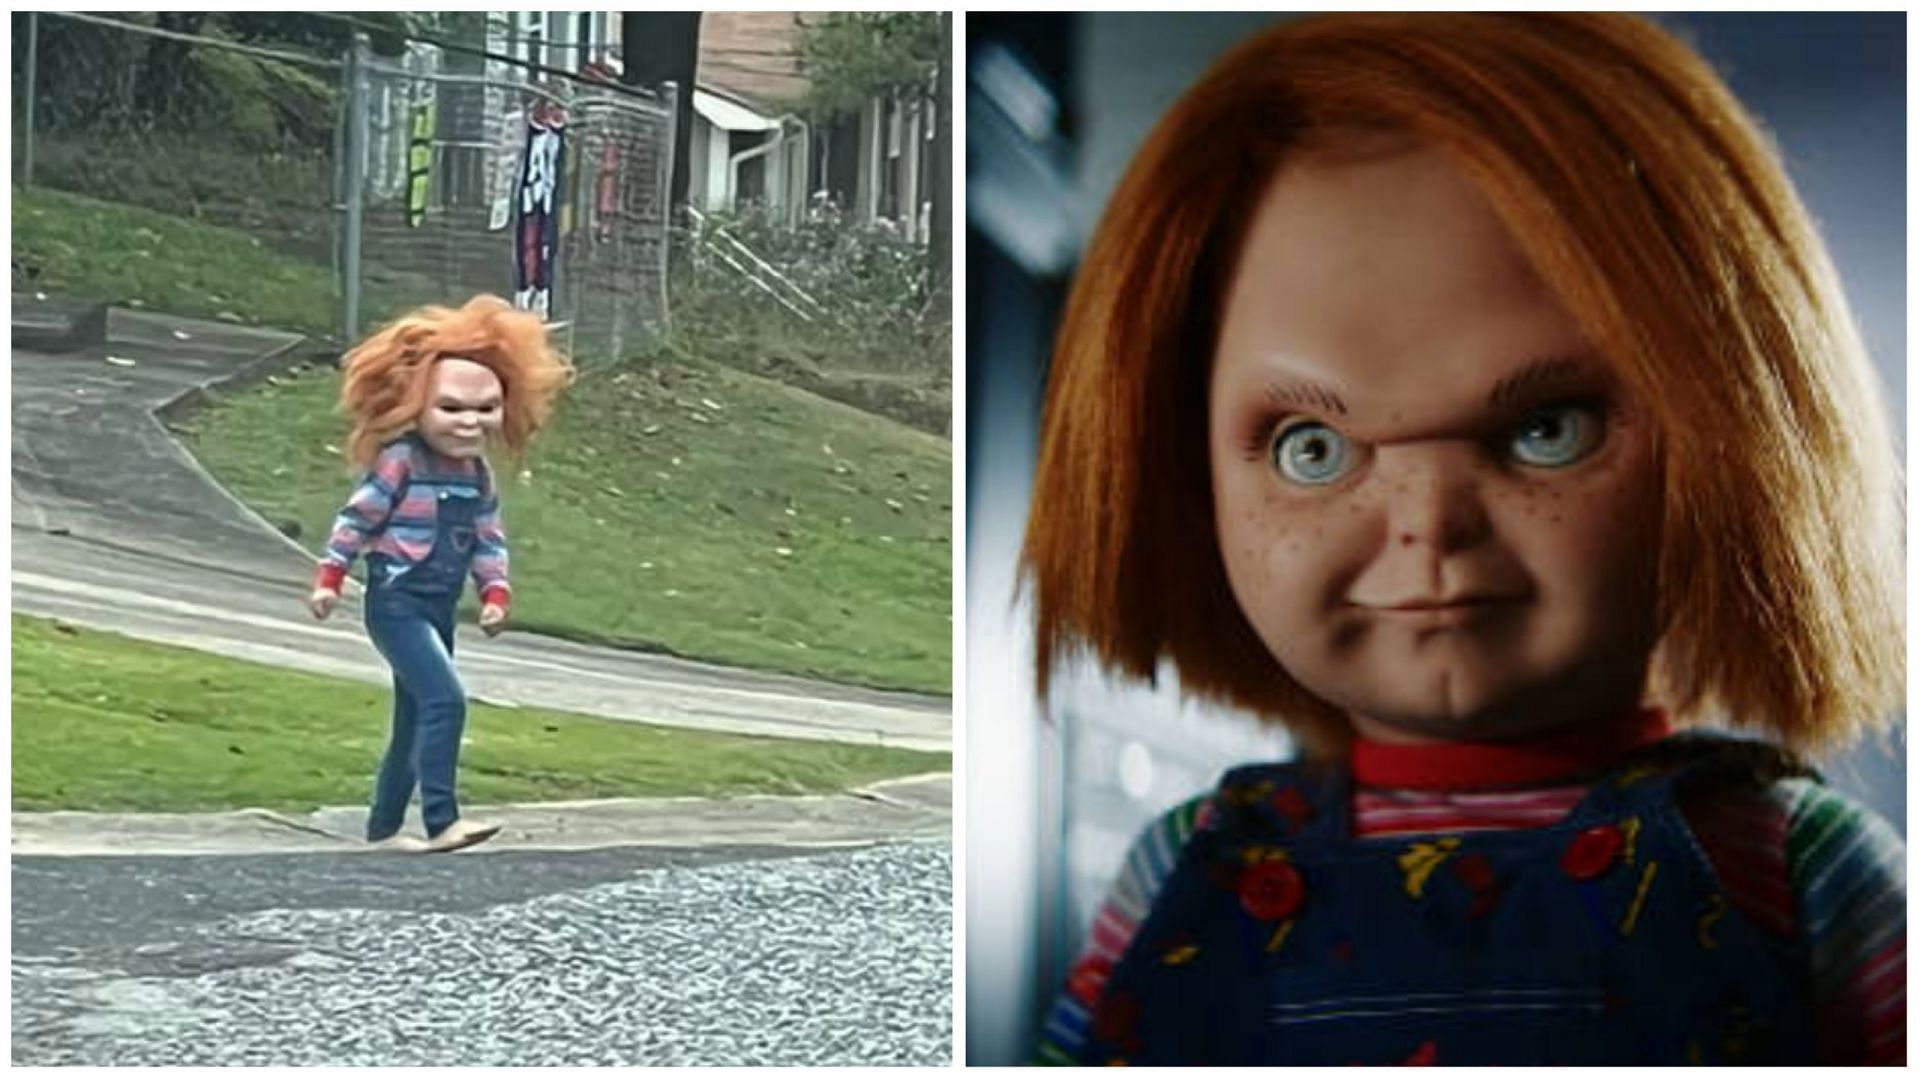 Alabama residents spot a real-life Chucky walking around the streets (Image via Kendra Walden/Facebook and SYFY /Getty Images)